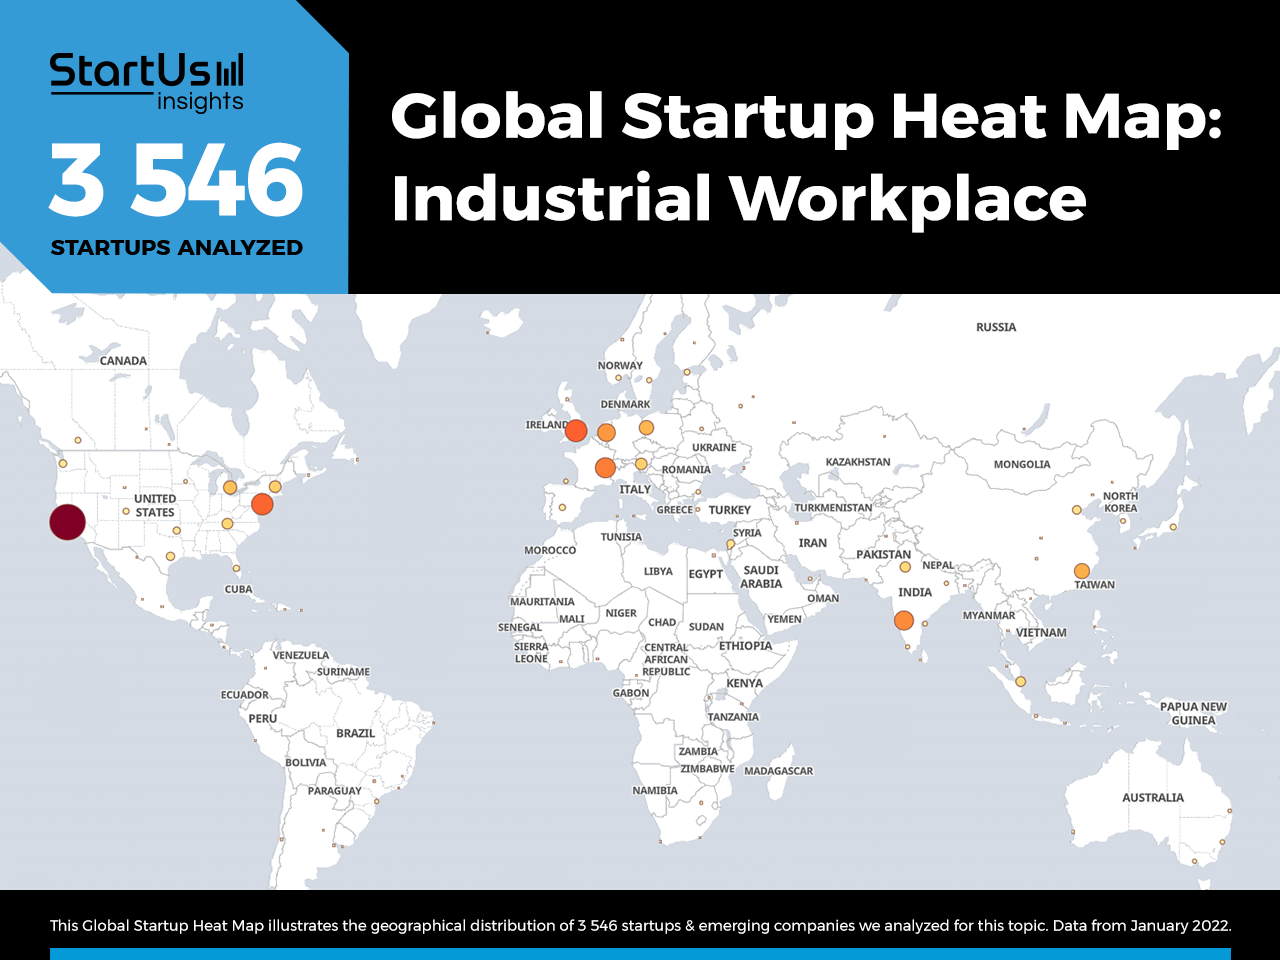 Industrial-Workplace-Trends-Research-Startups-Heat-Map-StartUs-Insights-noresize